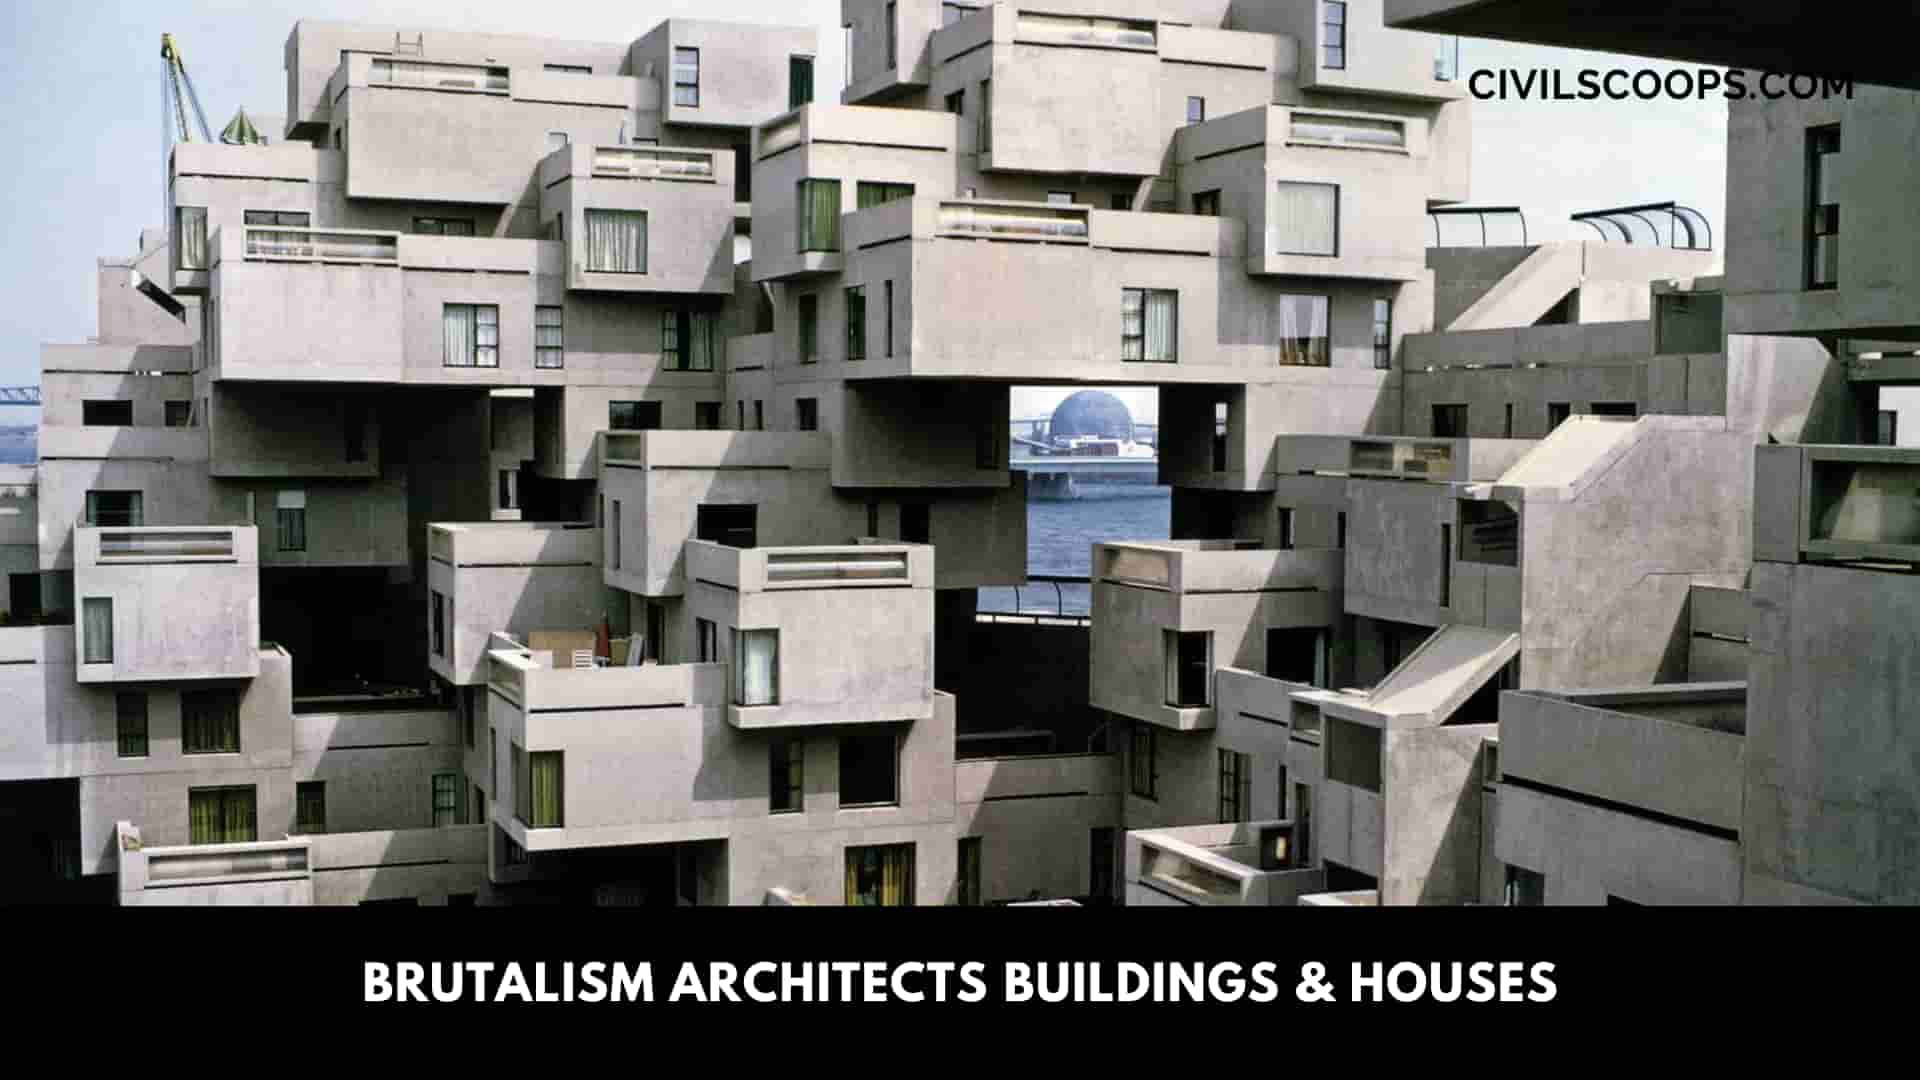 Brutalism Architects Buildings & Houses